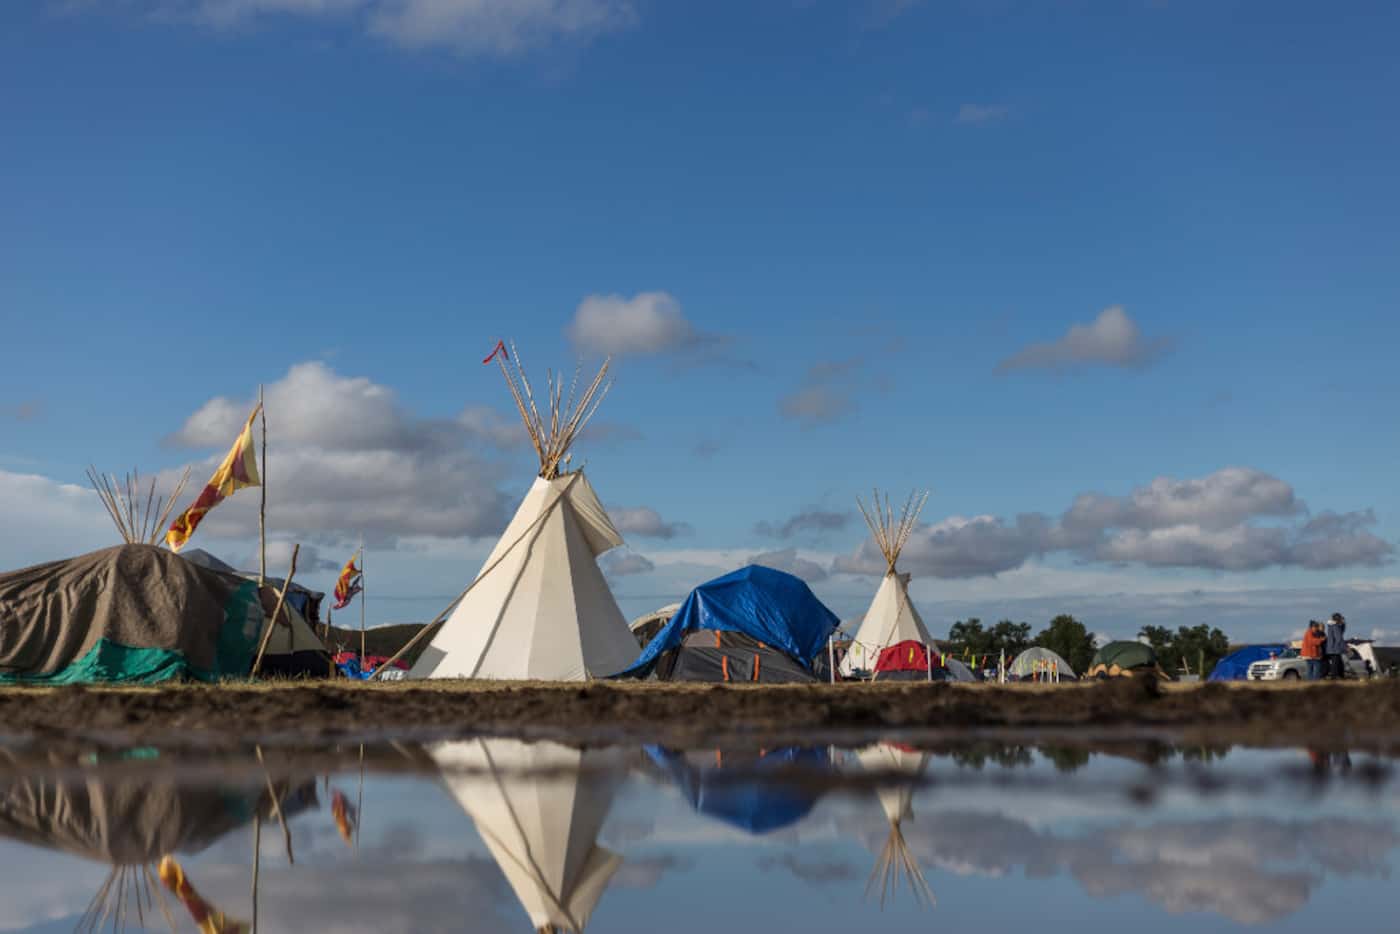 Reflection of inside of Oceti Sakowin camp after the rain in Cannonball, North Dakota on...